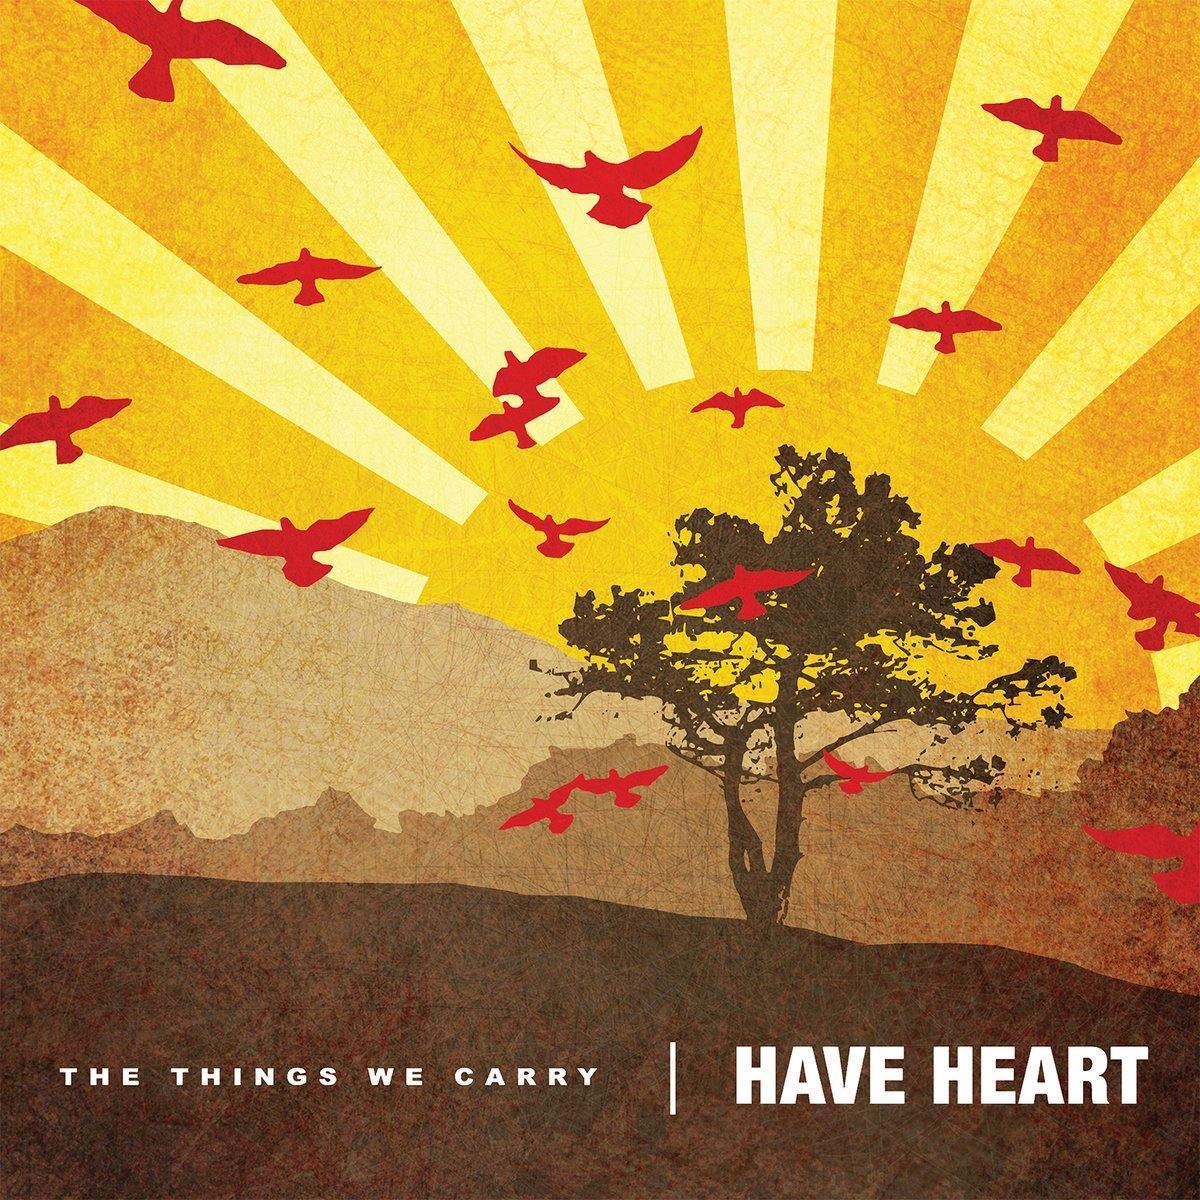 Buy – Have Heart "The Things We Carry" CD – Band & Music Merch – Cold Cuts Merch